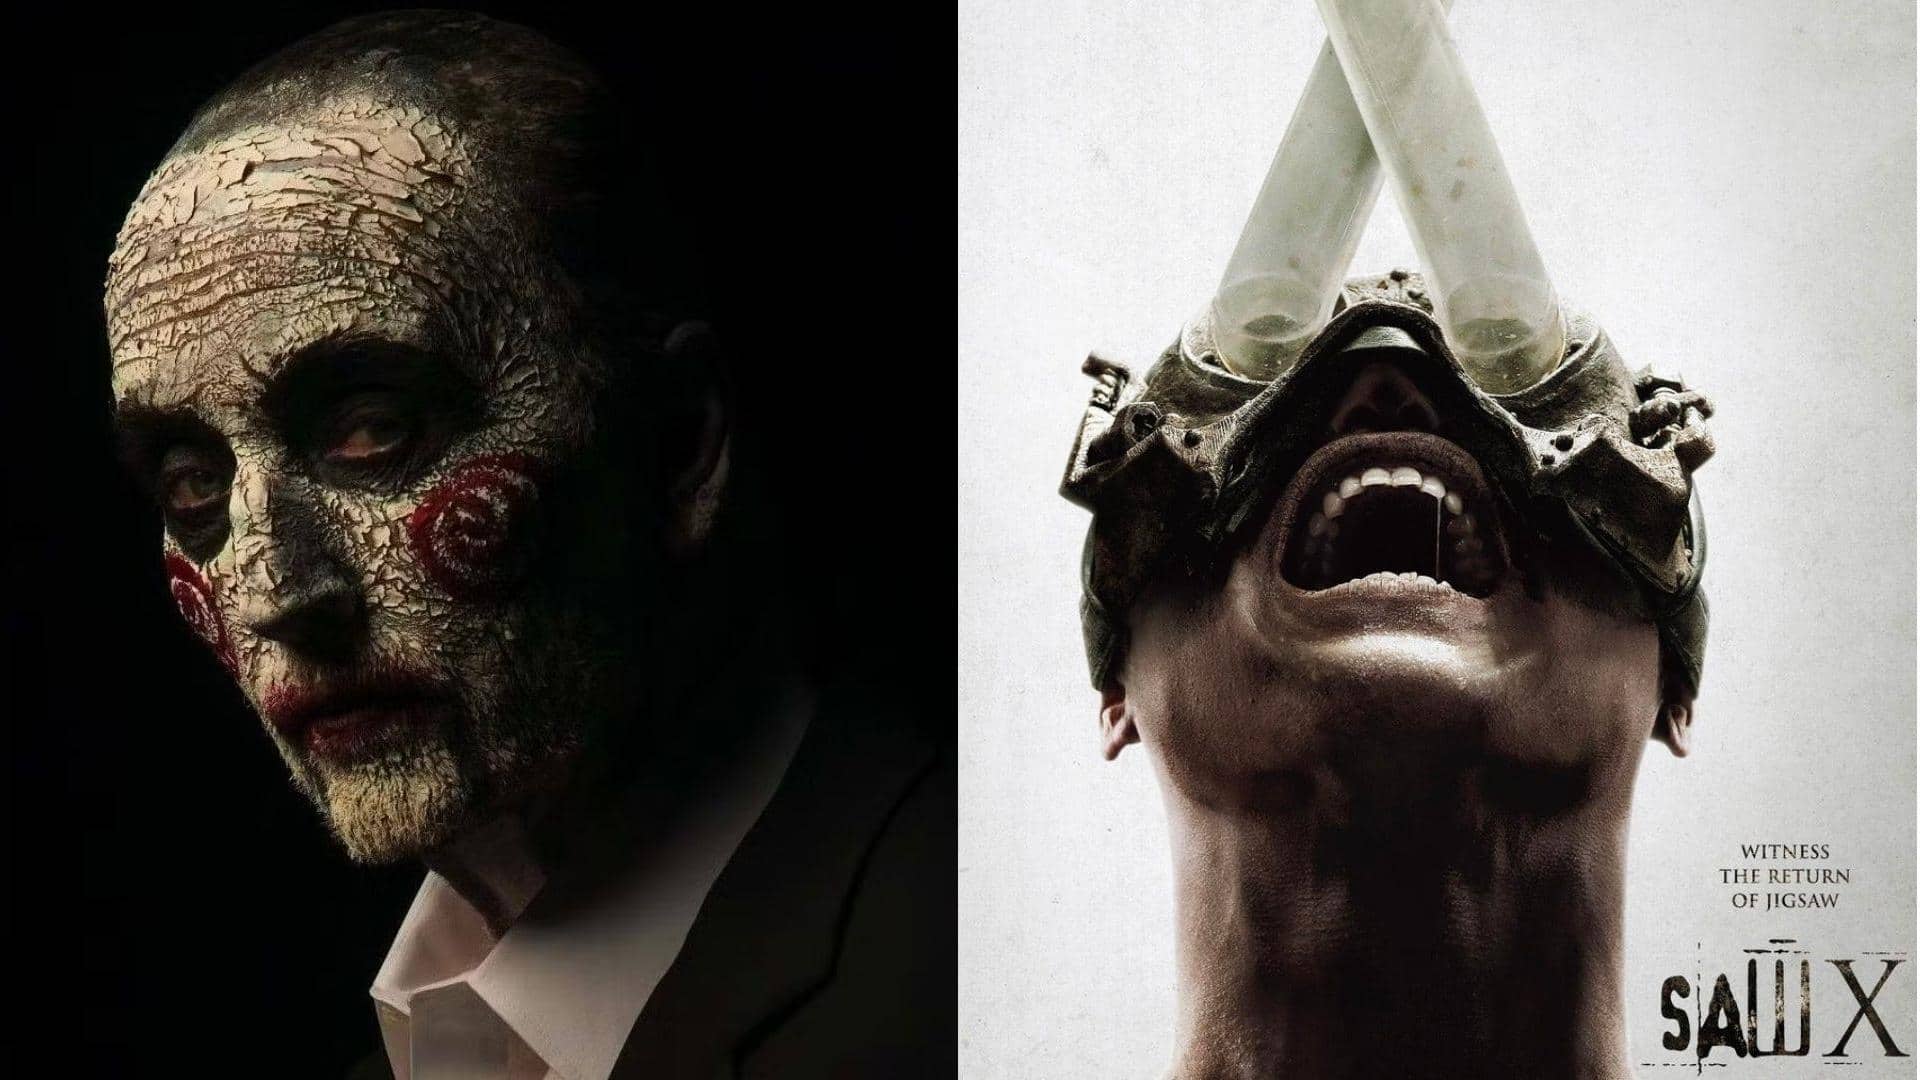 'Saw X' trailer unveils Jigsaw's diabolical encore, unleashes twisted games